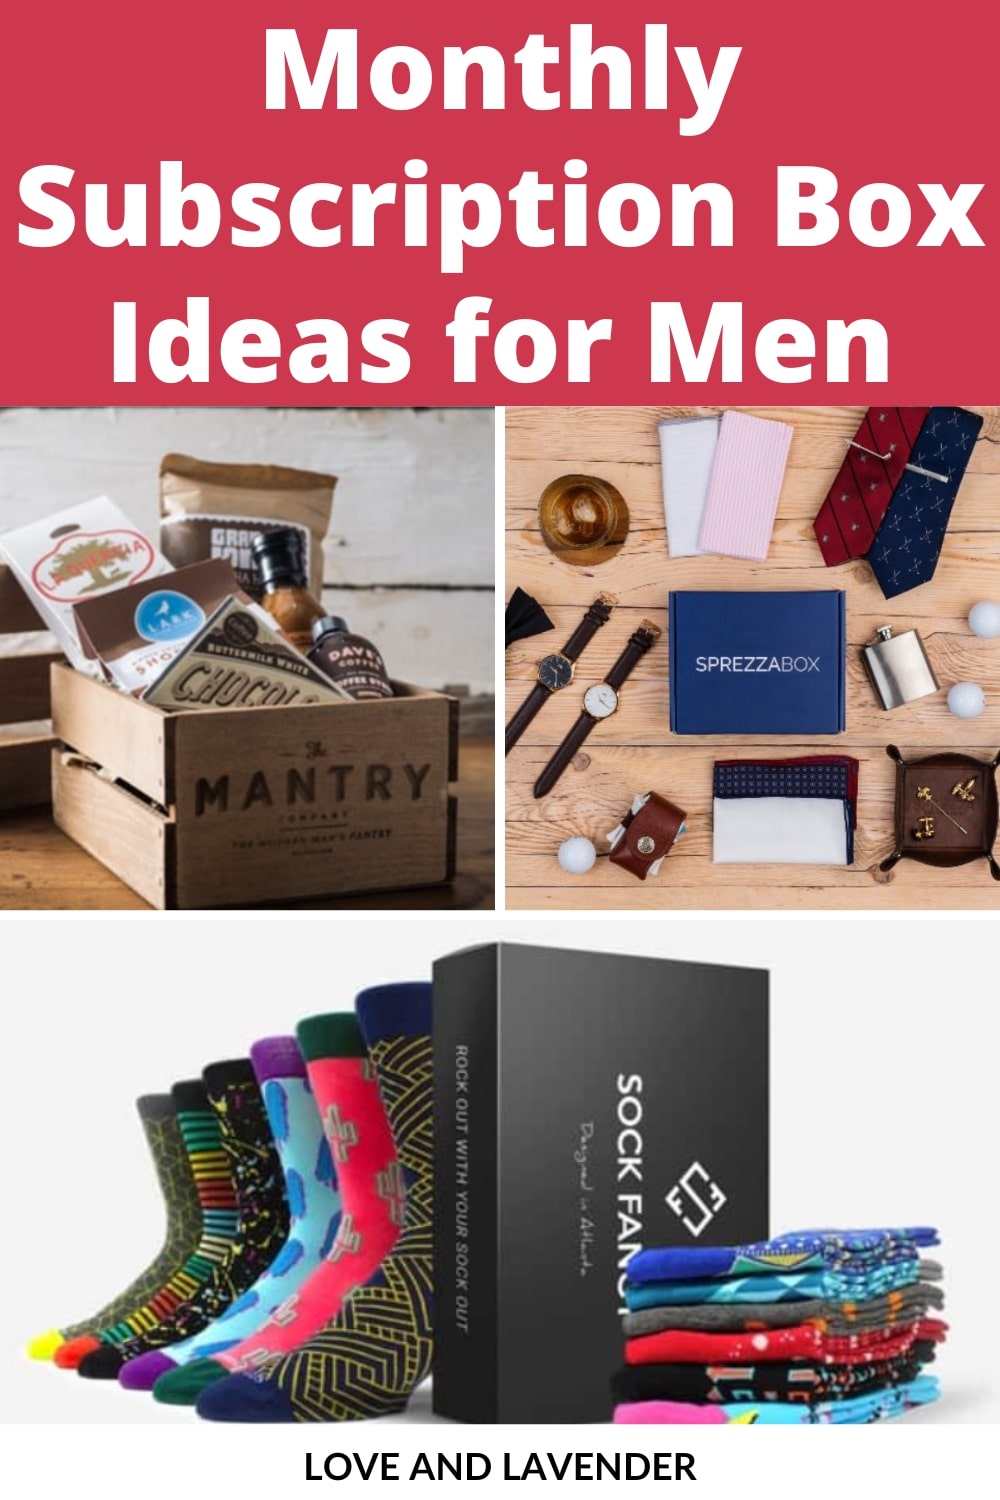 17 Best Subscription Boxes For Men in 2021 (Eat, Drink, And Be Merry!)